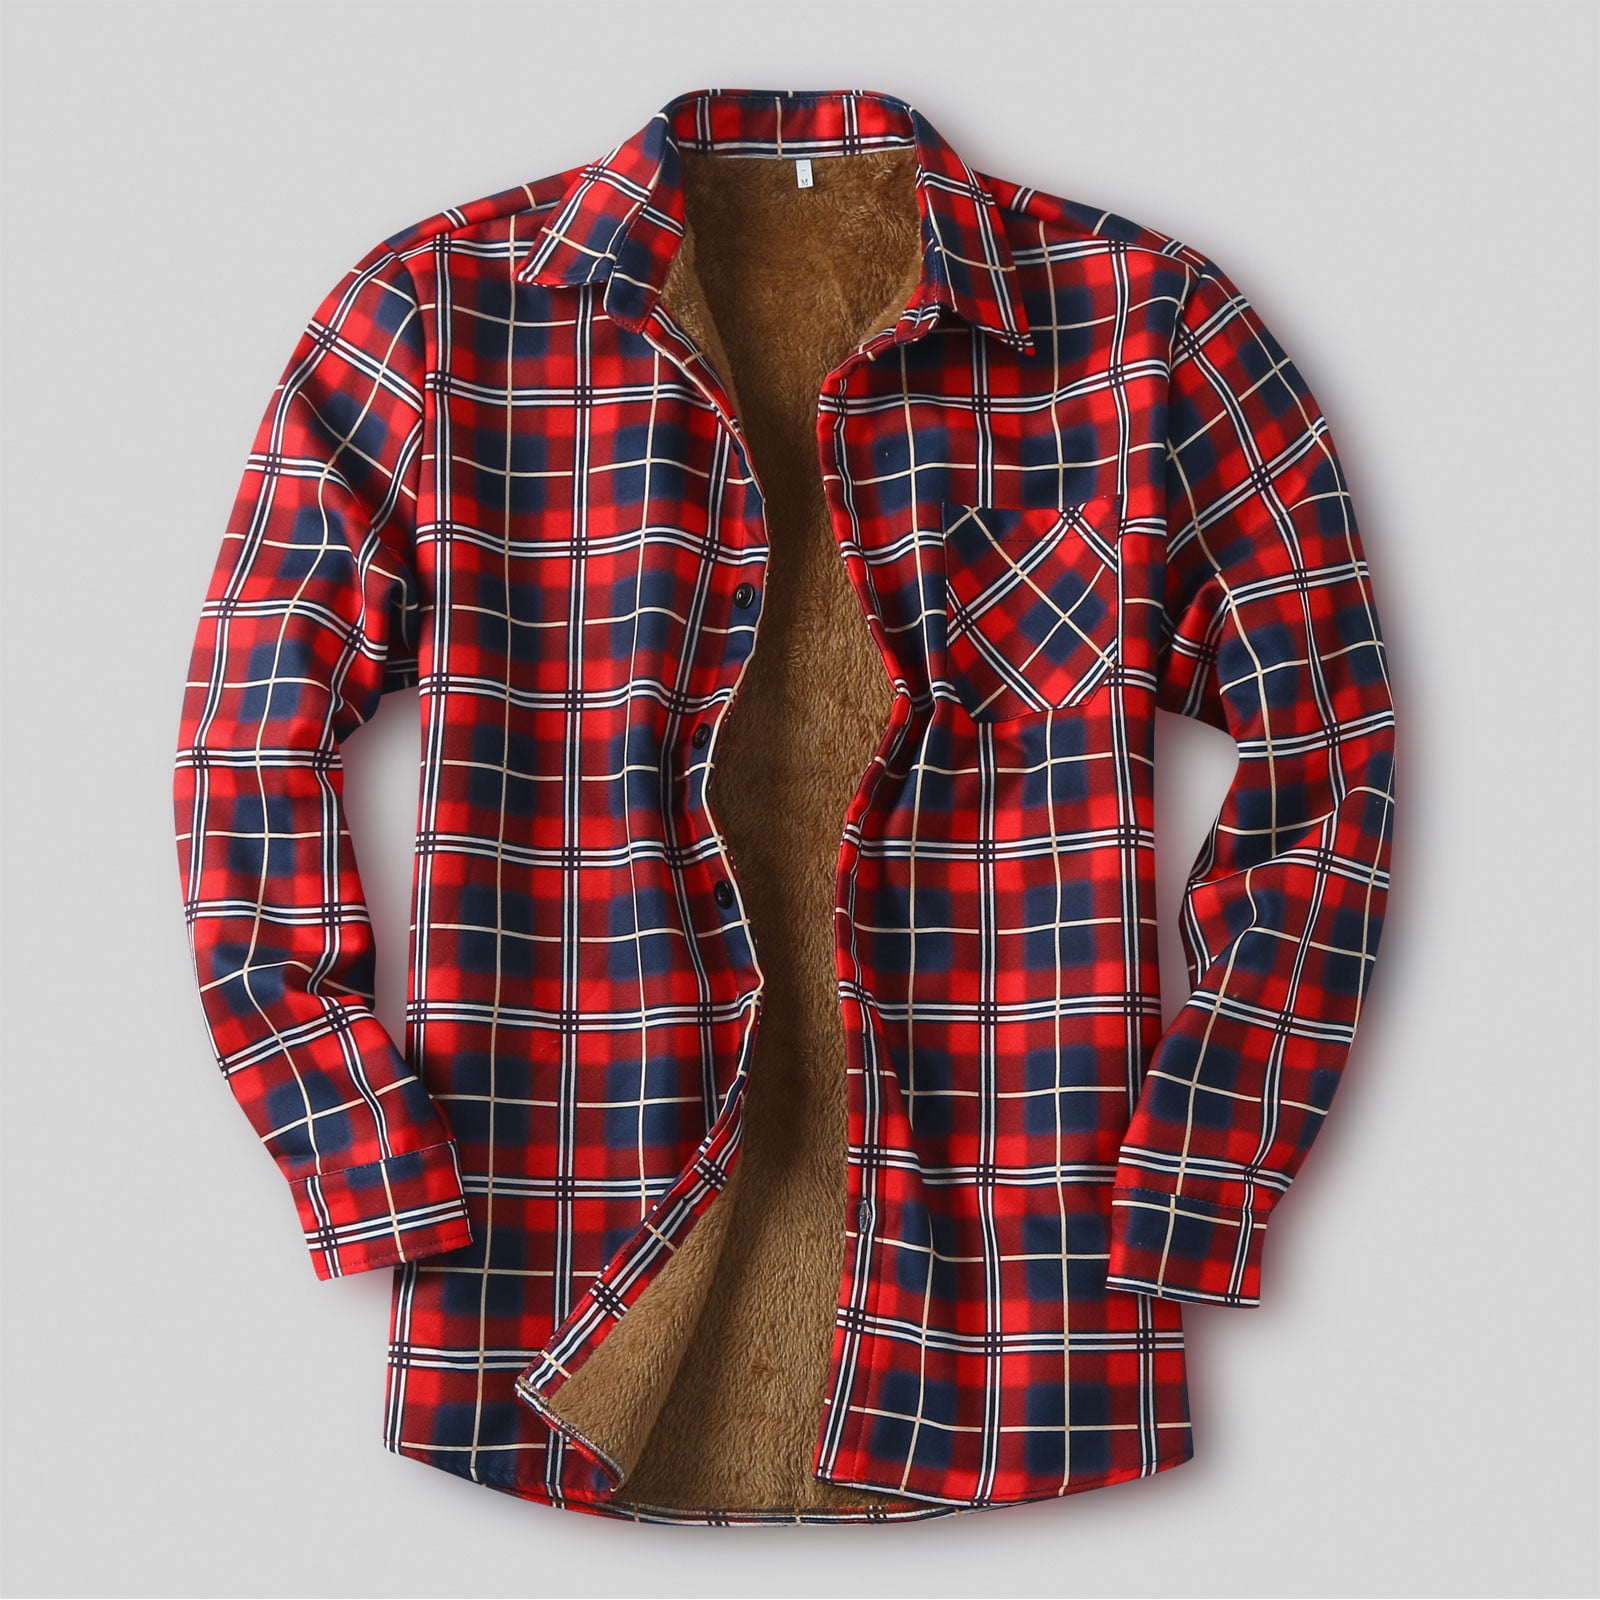 Men's Warm Sherpa Lined Fleece Plaid Flannel Shirt Jacket,Men's Plaid Long  Sleeve Flannel Lined Buttoned Shirt, Winter Windproof and Warm Jacket